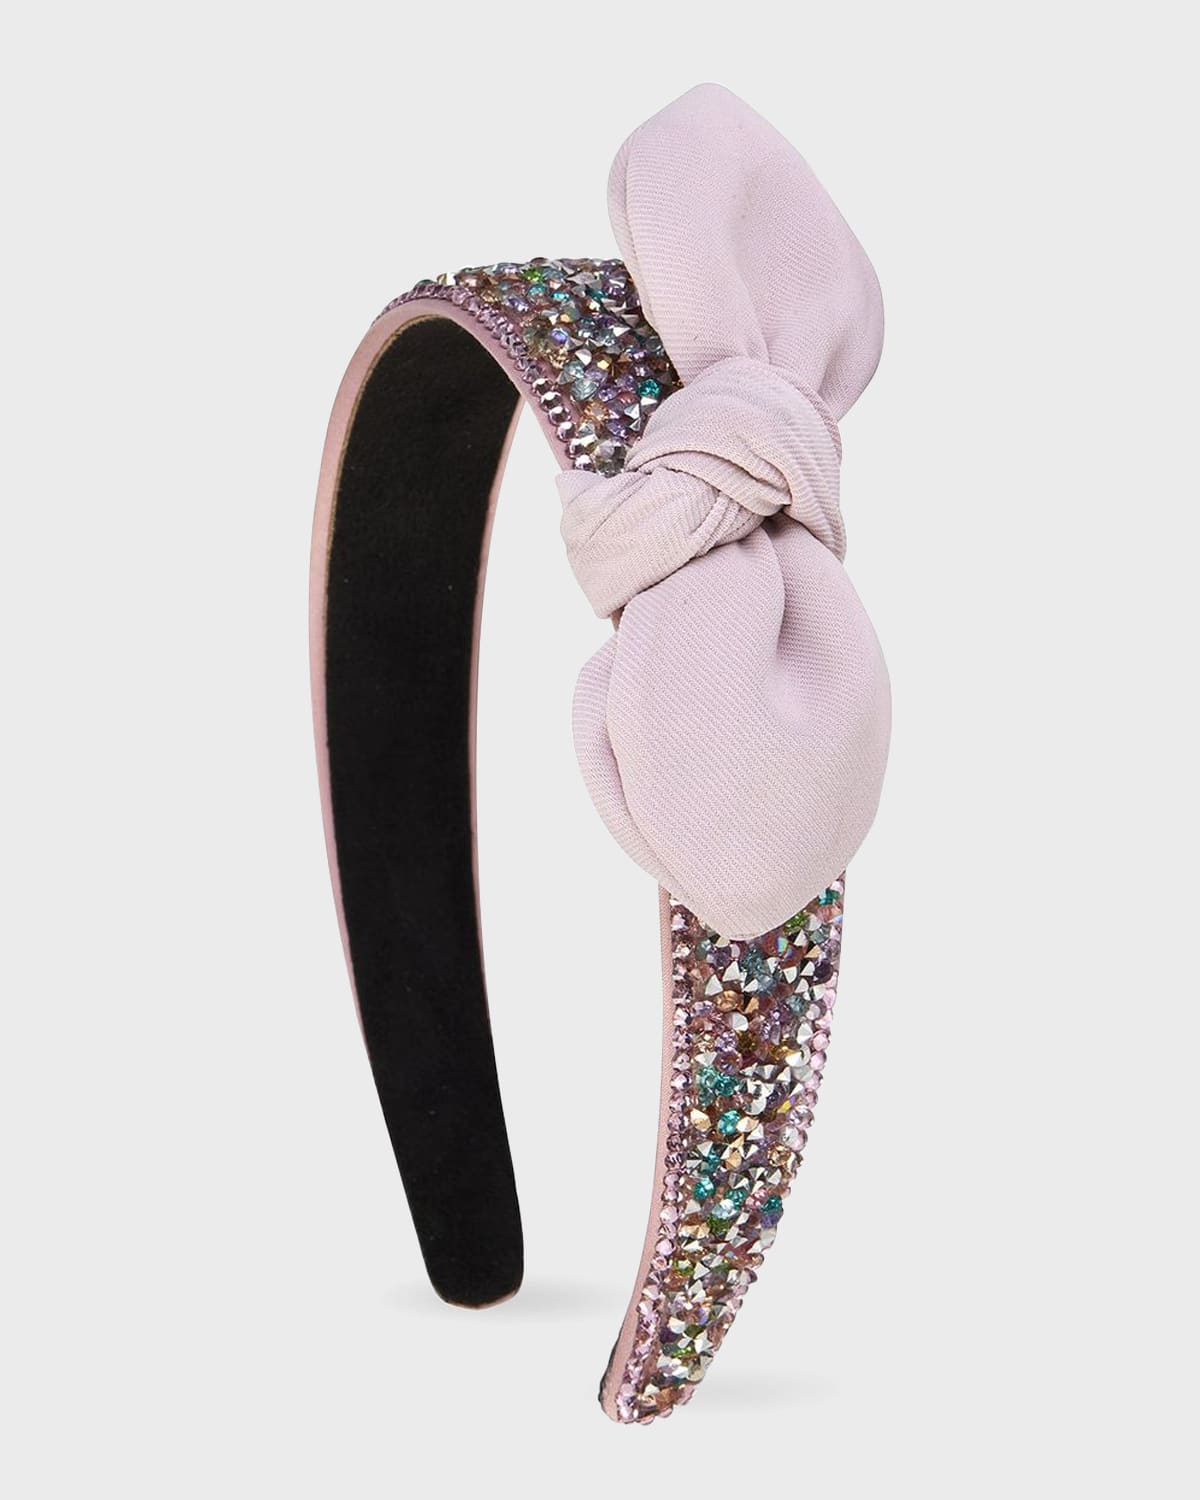 Bling2o Kid's Claire Bow Embellished Headband